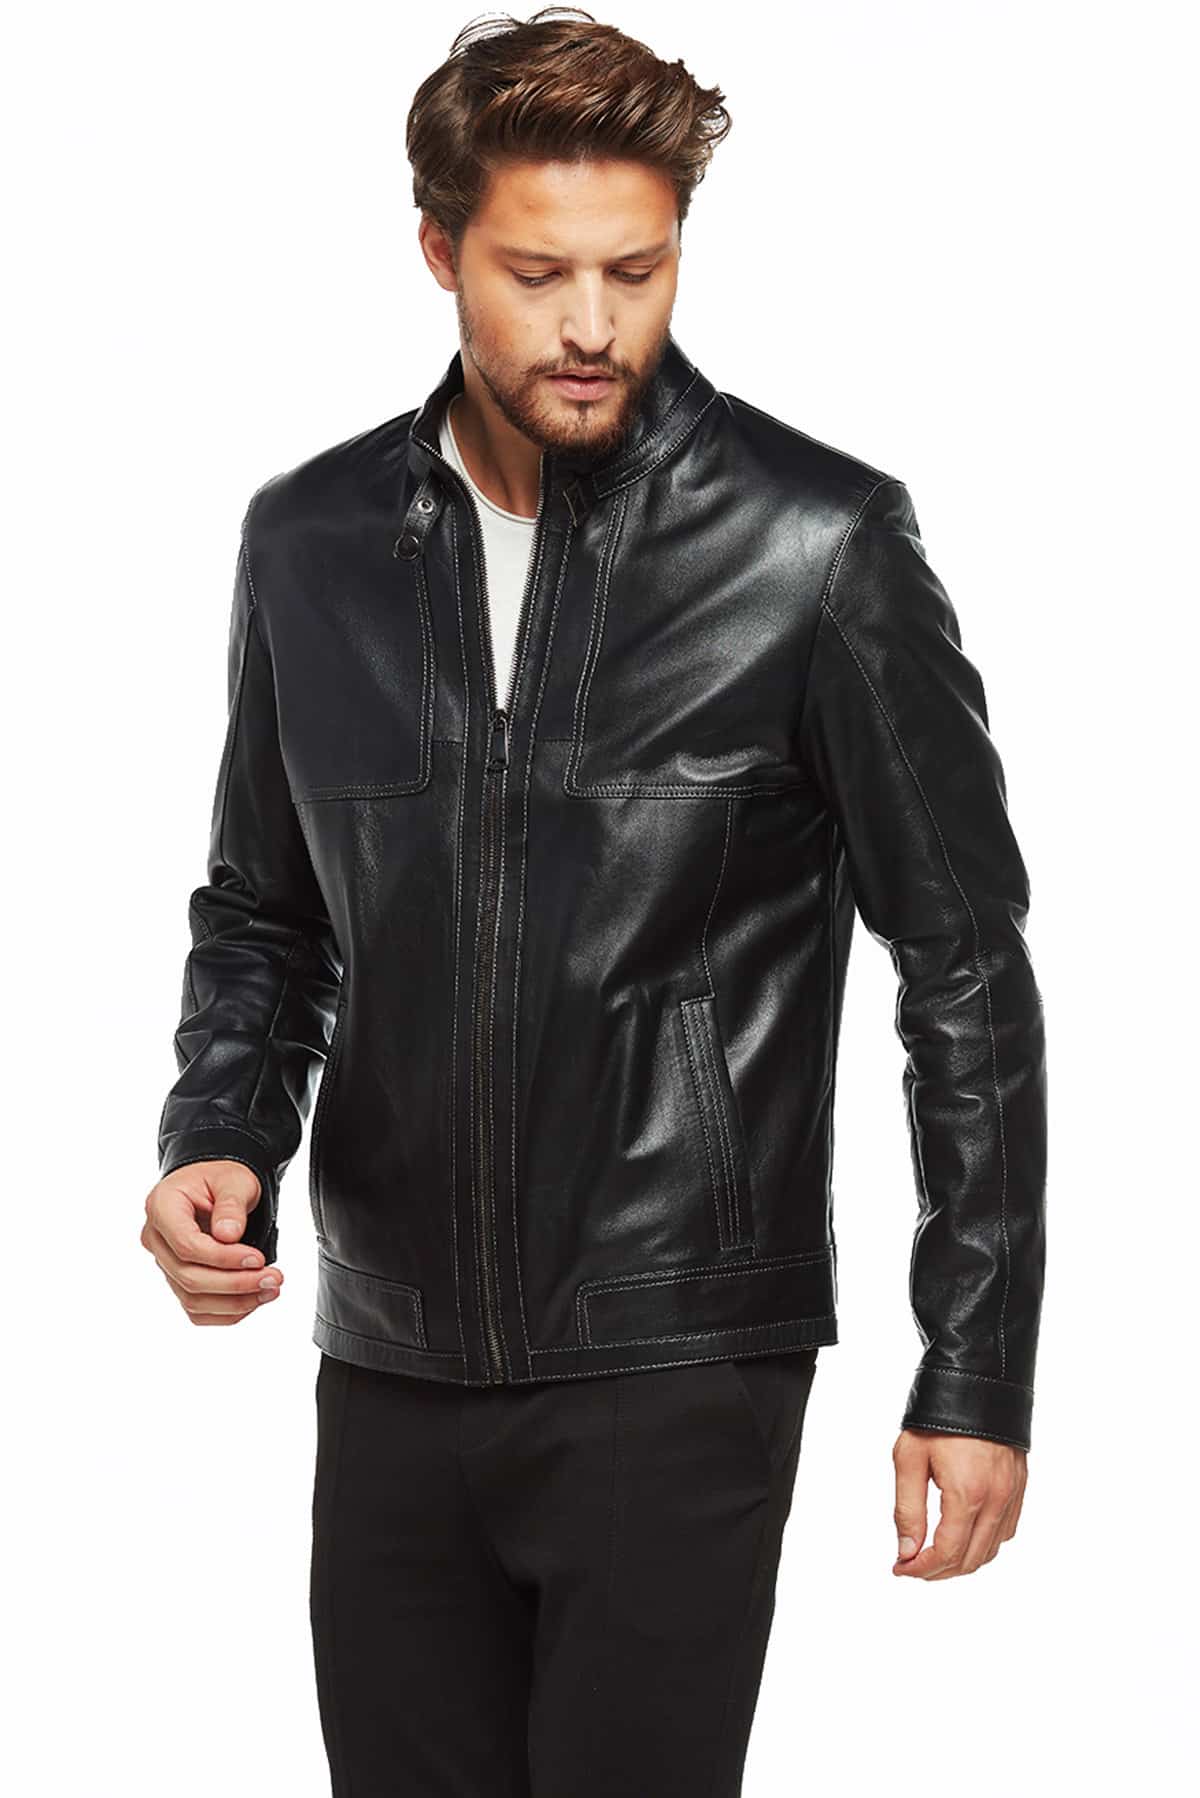 Mens Jackets Sale - Photos All Recommendation